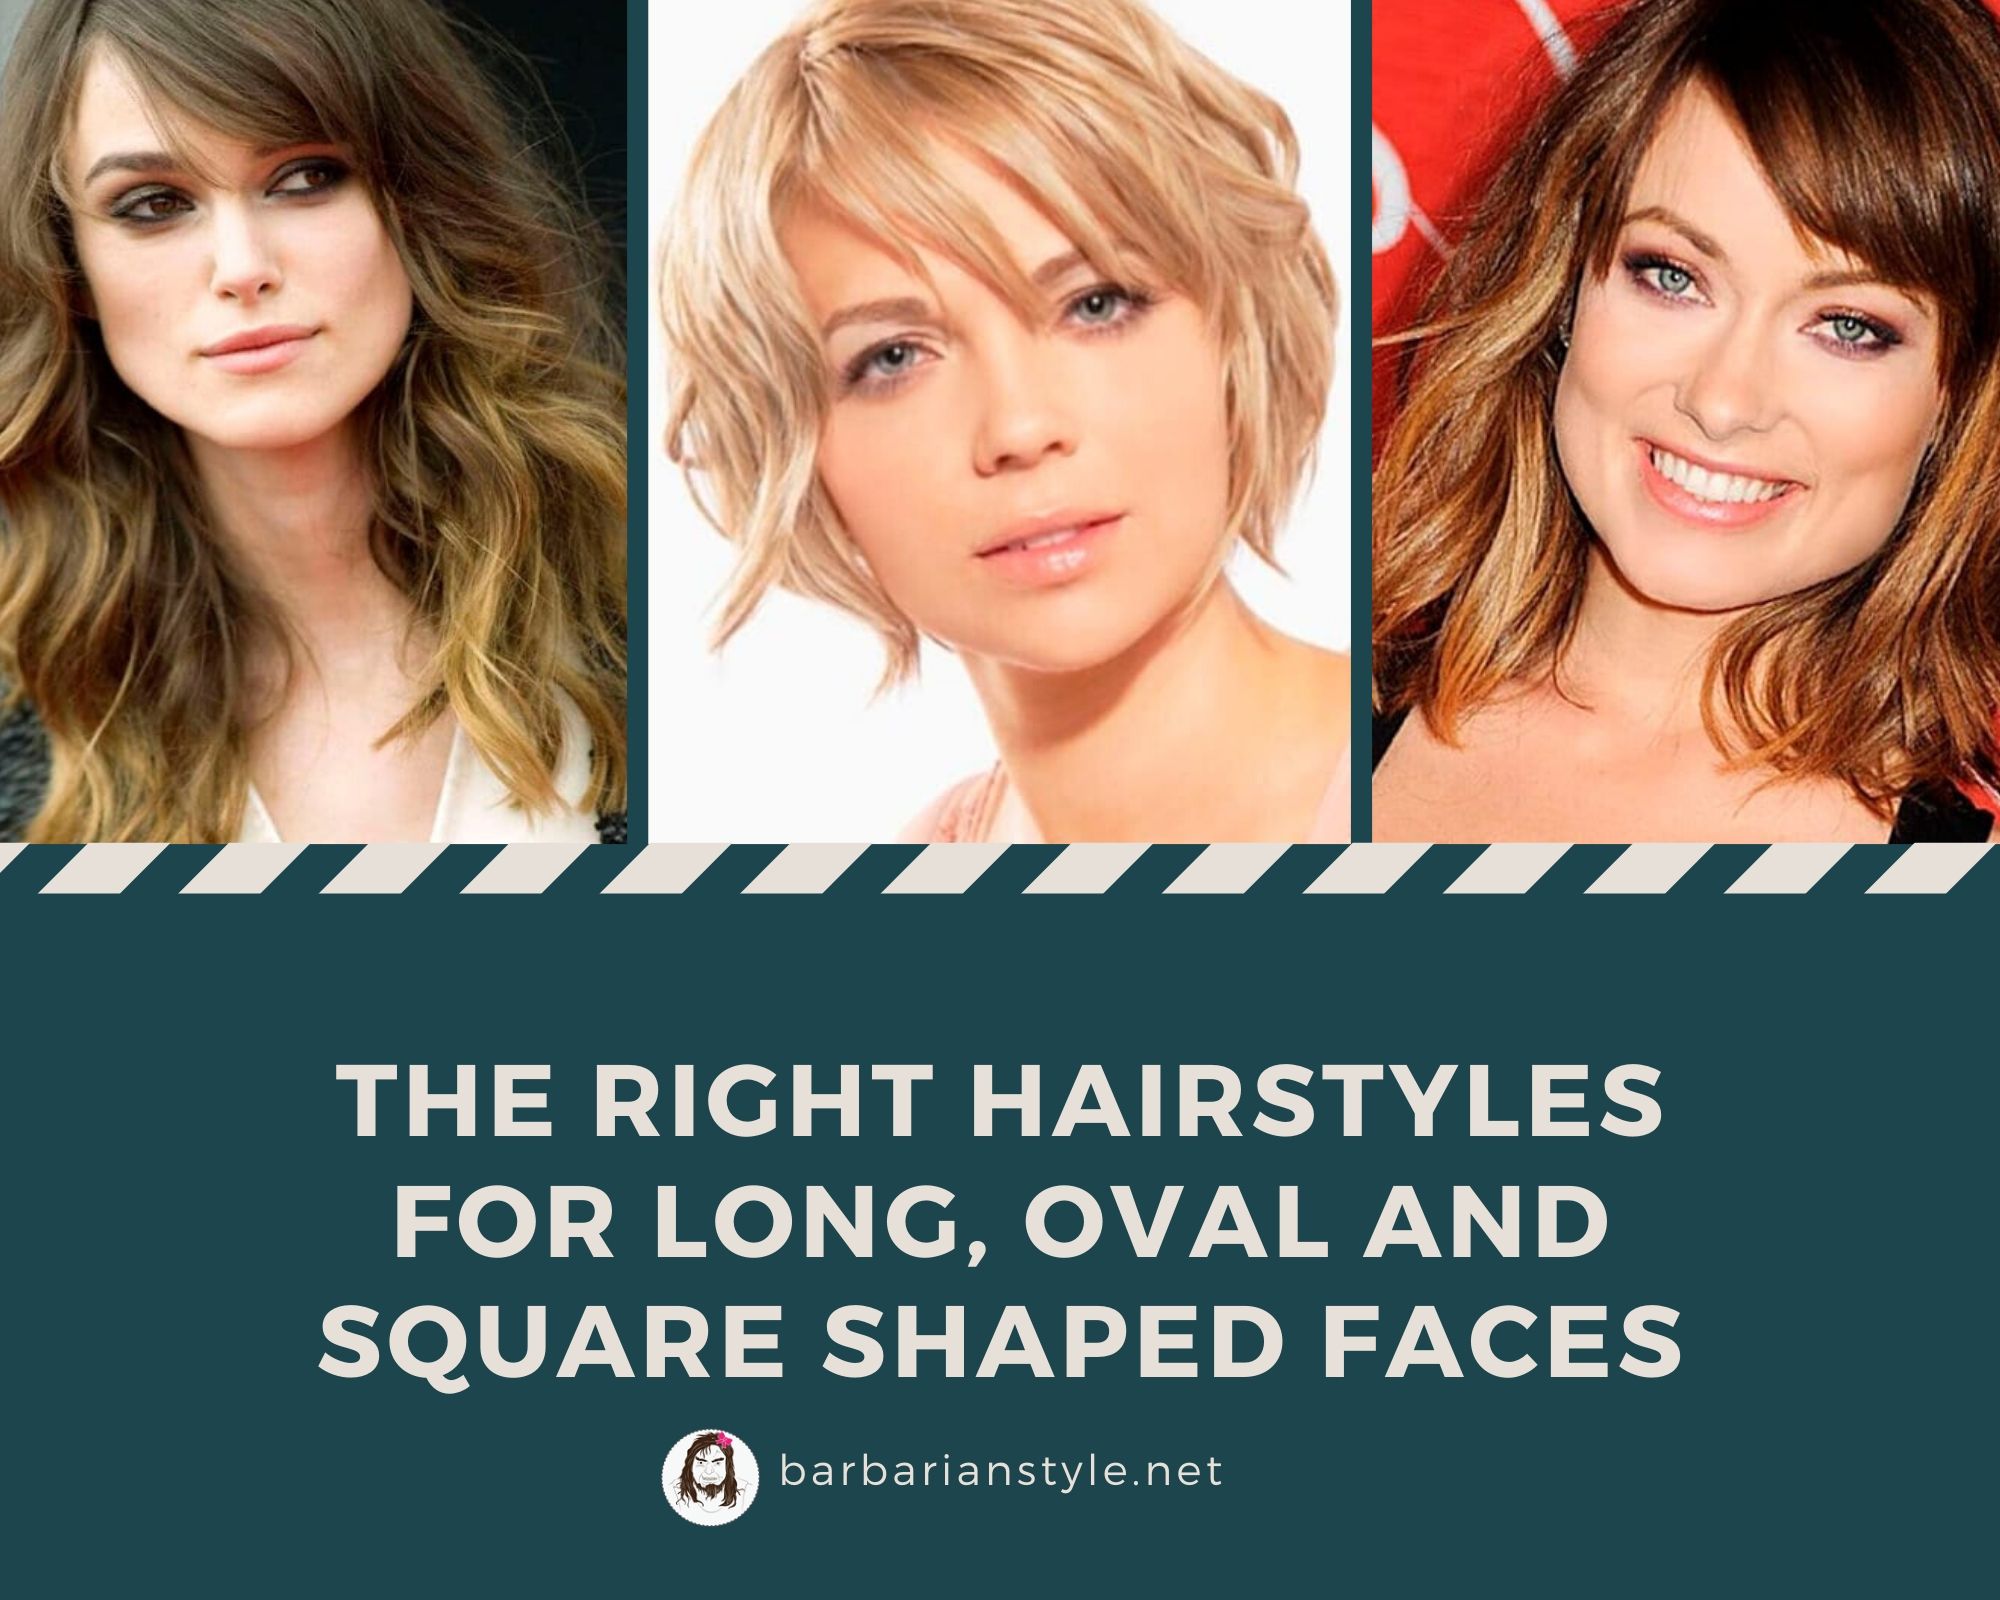 The Right Hairstyles for Long, Oval and Square Shaped Faces